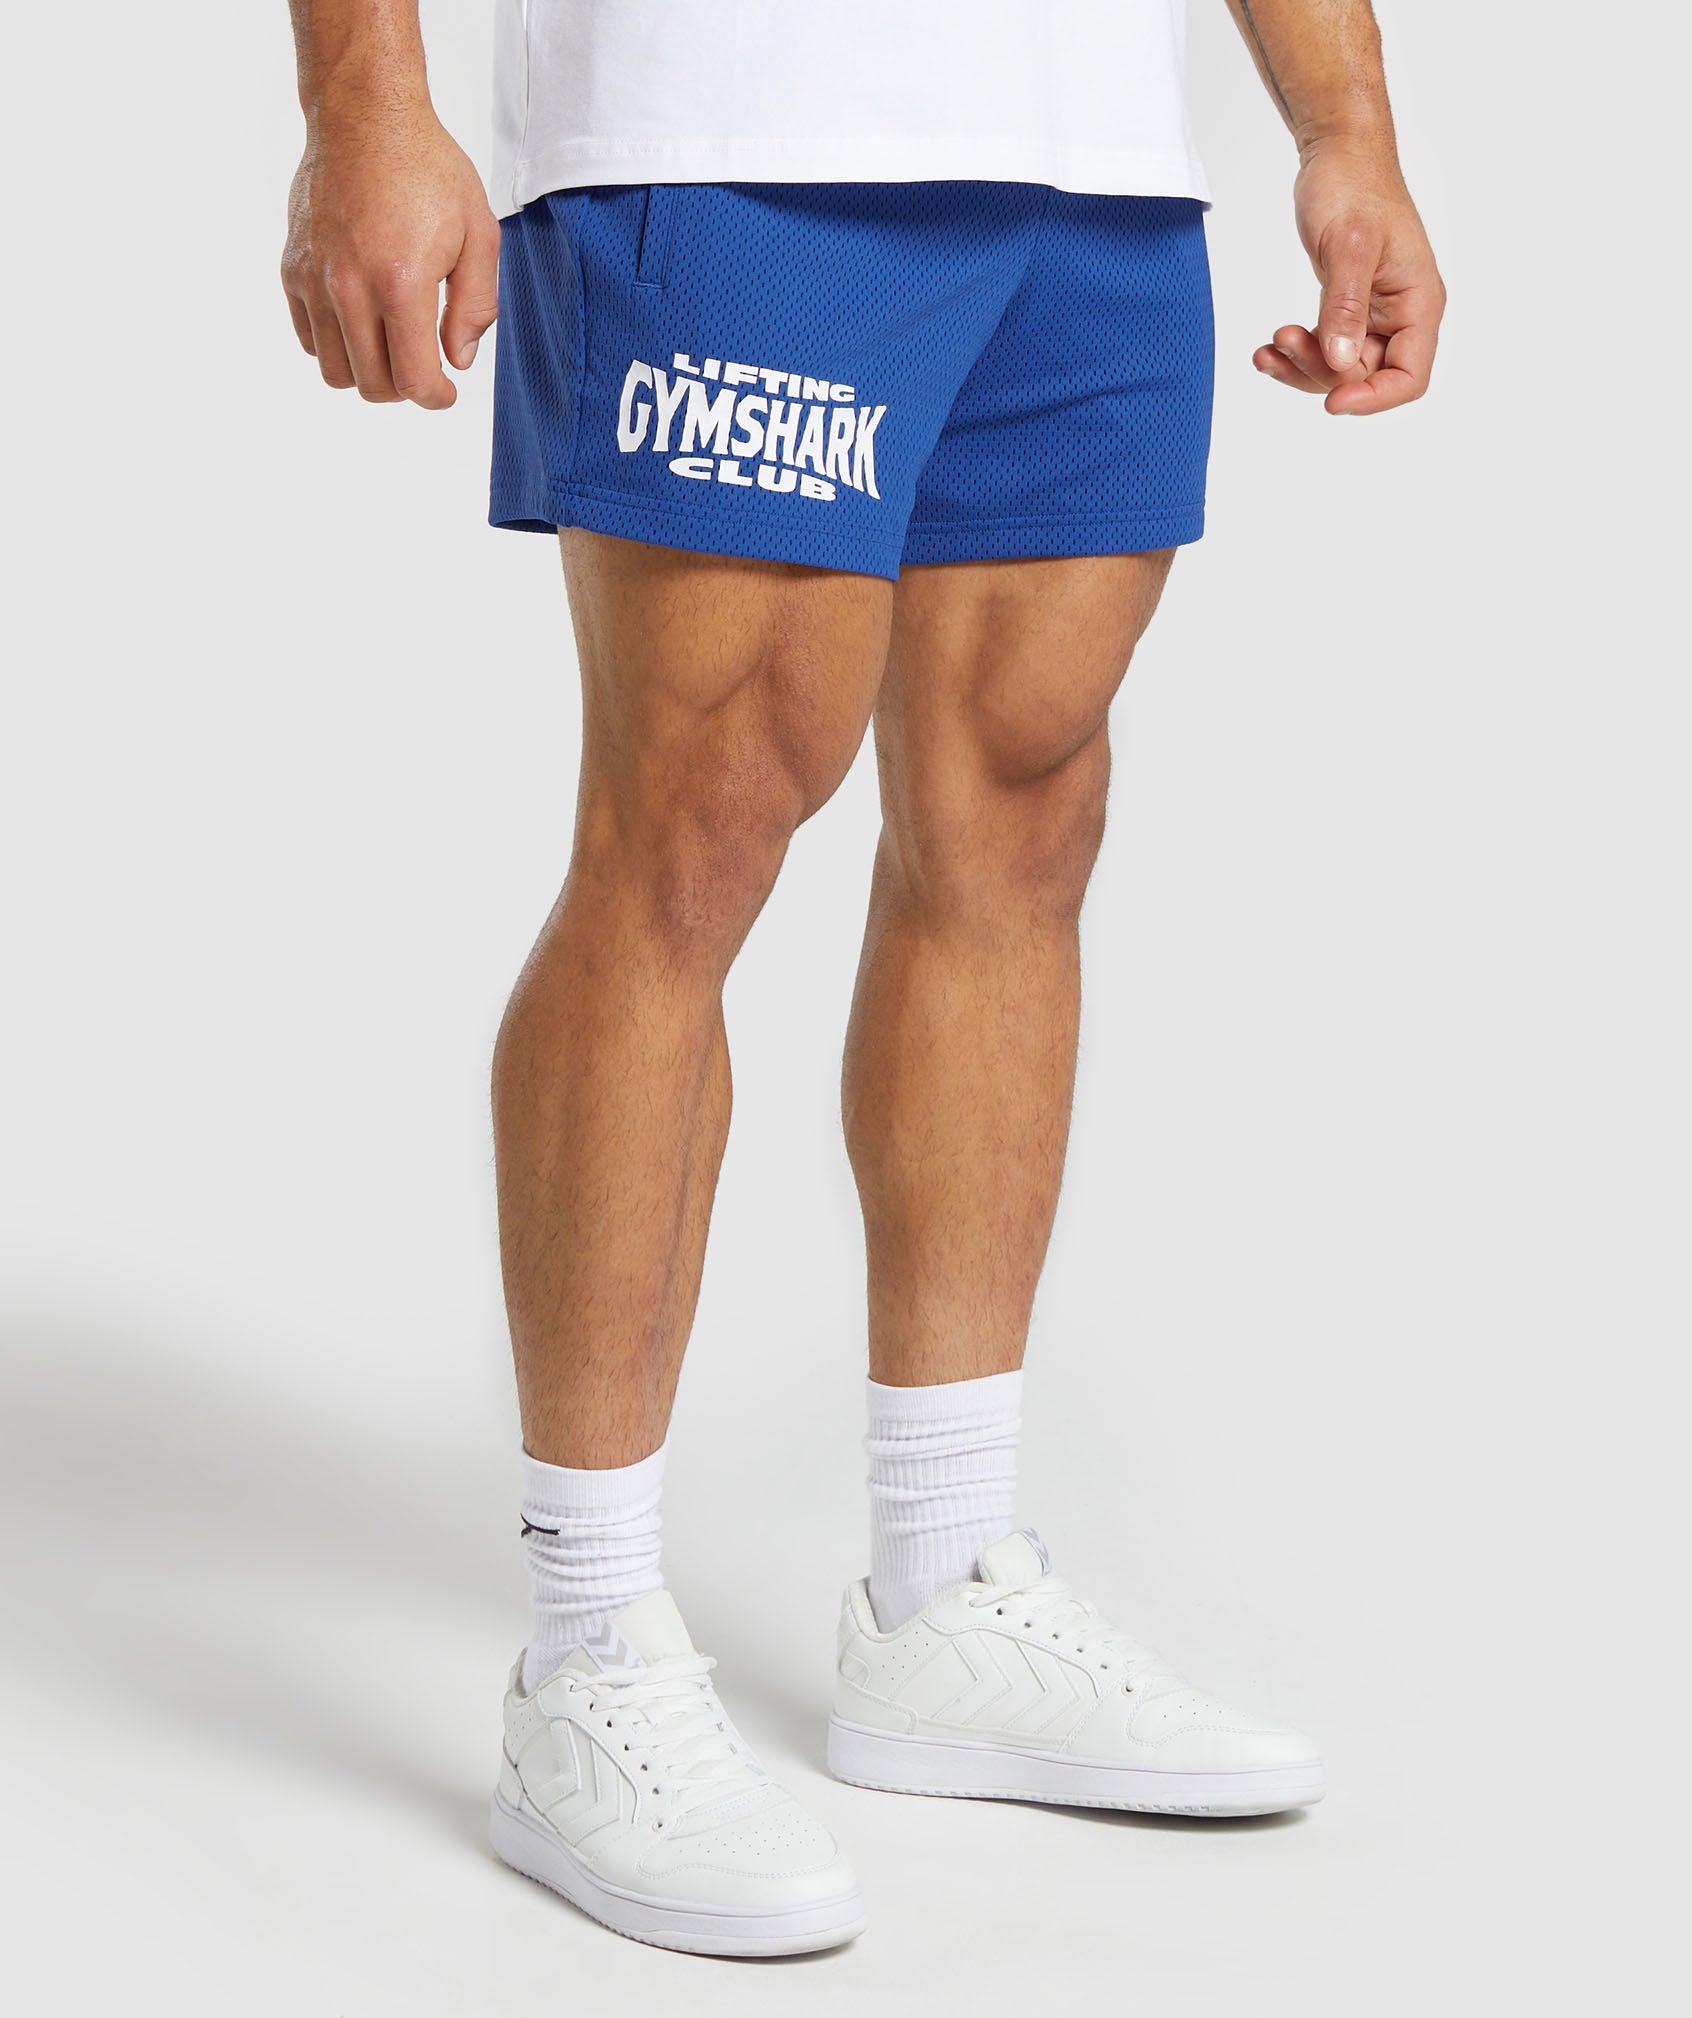 Lifting Club Mesh 5" Shorts in Wave Blue - view 3